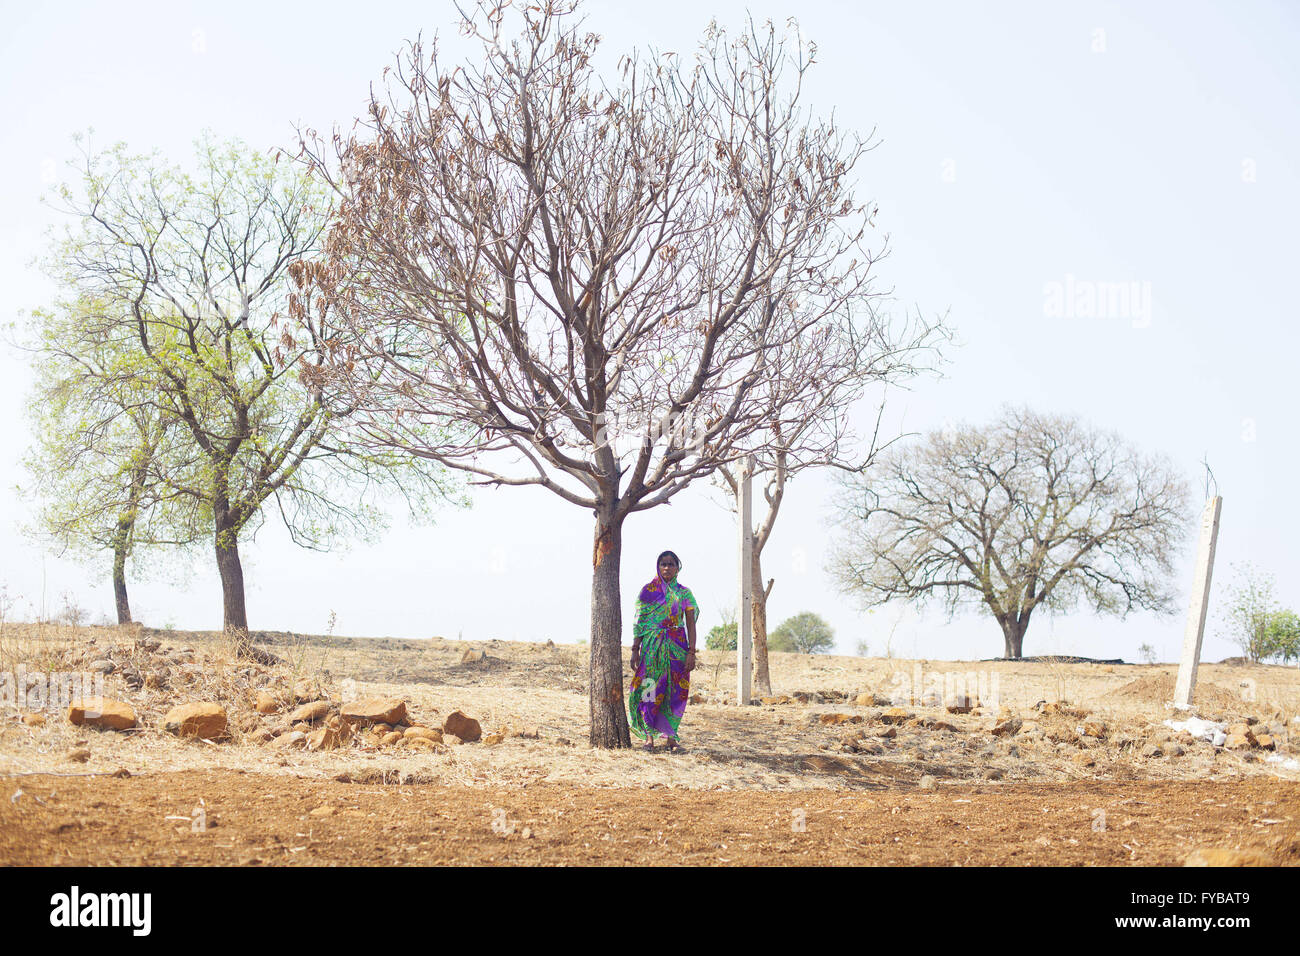 Latur, Maharashtra. 21st Apr, 2016. 21 April 2016 - Gategaon, Latur - INDIA.Kamalbai stands under the dried Mango tree from which her husband & farmer Mahakant Mali, 55, hanged himself.Latur is part of the state's predominantly agricultural Marathwada region, where 273 farmers committed suicide between January and March this year.The area is among the worst affected by the drought and some families in Latur have left for cities such as the state capital Mumbai, nearly 500 kilometres away. In Latur town, there are huge queues at water storage tanks that are fed from dams. People wait i Stock Photo